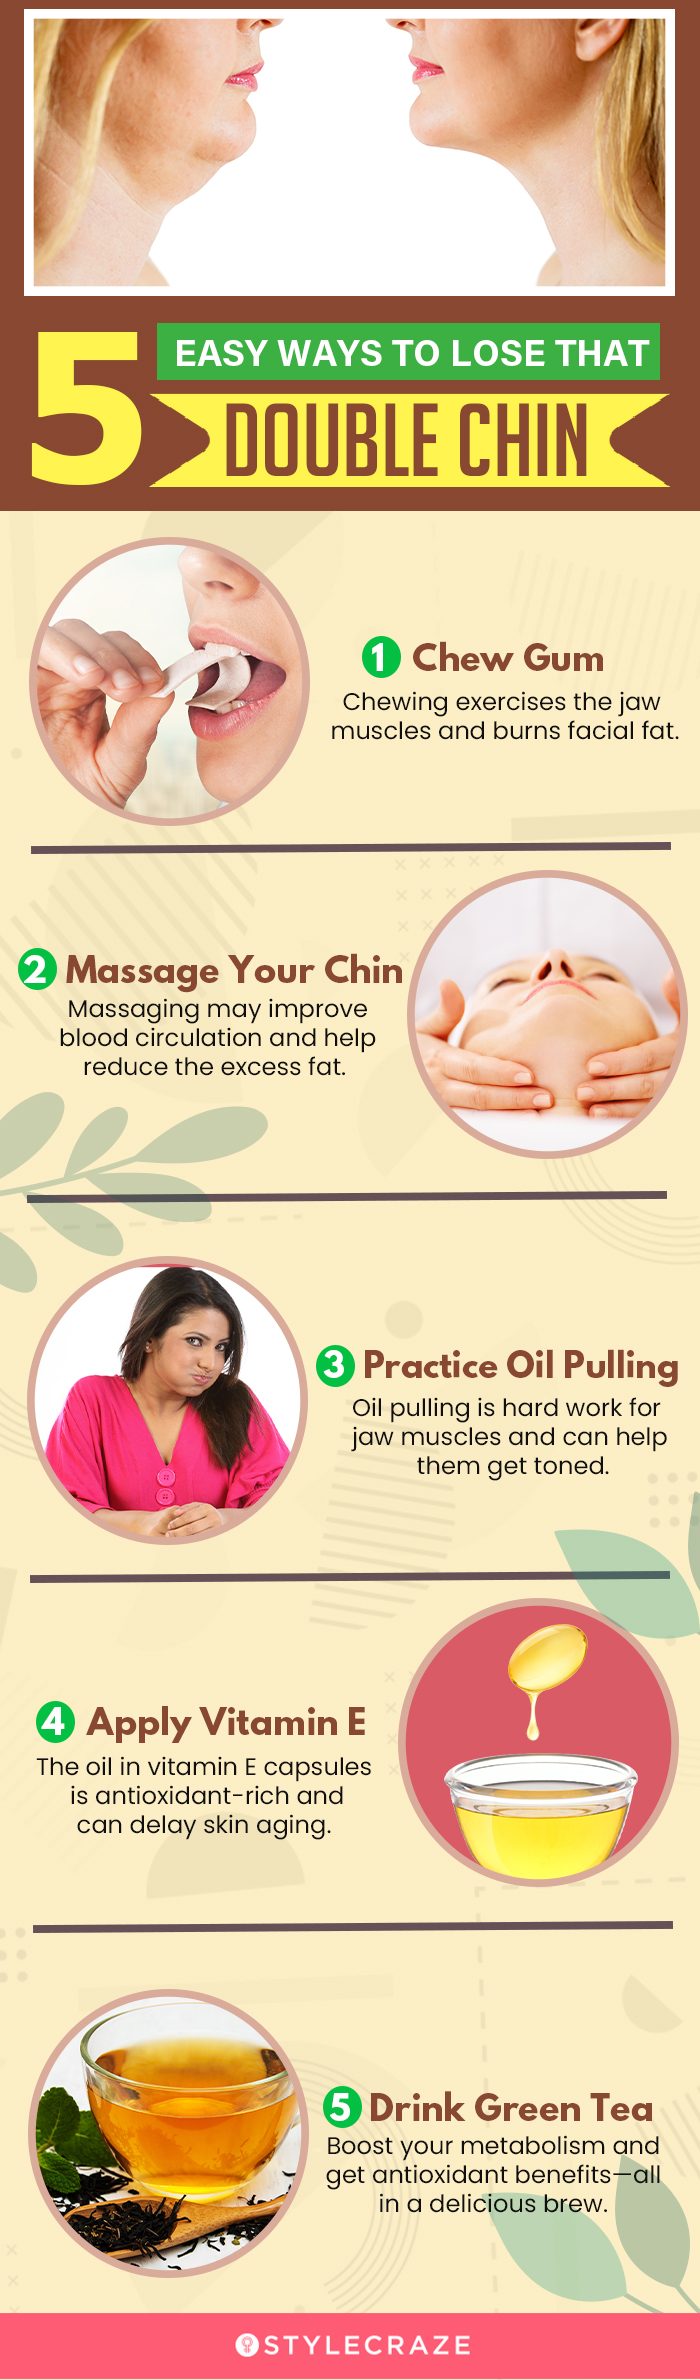 5 easy ways to lose that double chin [infographic]